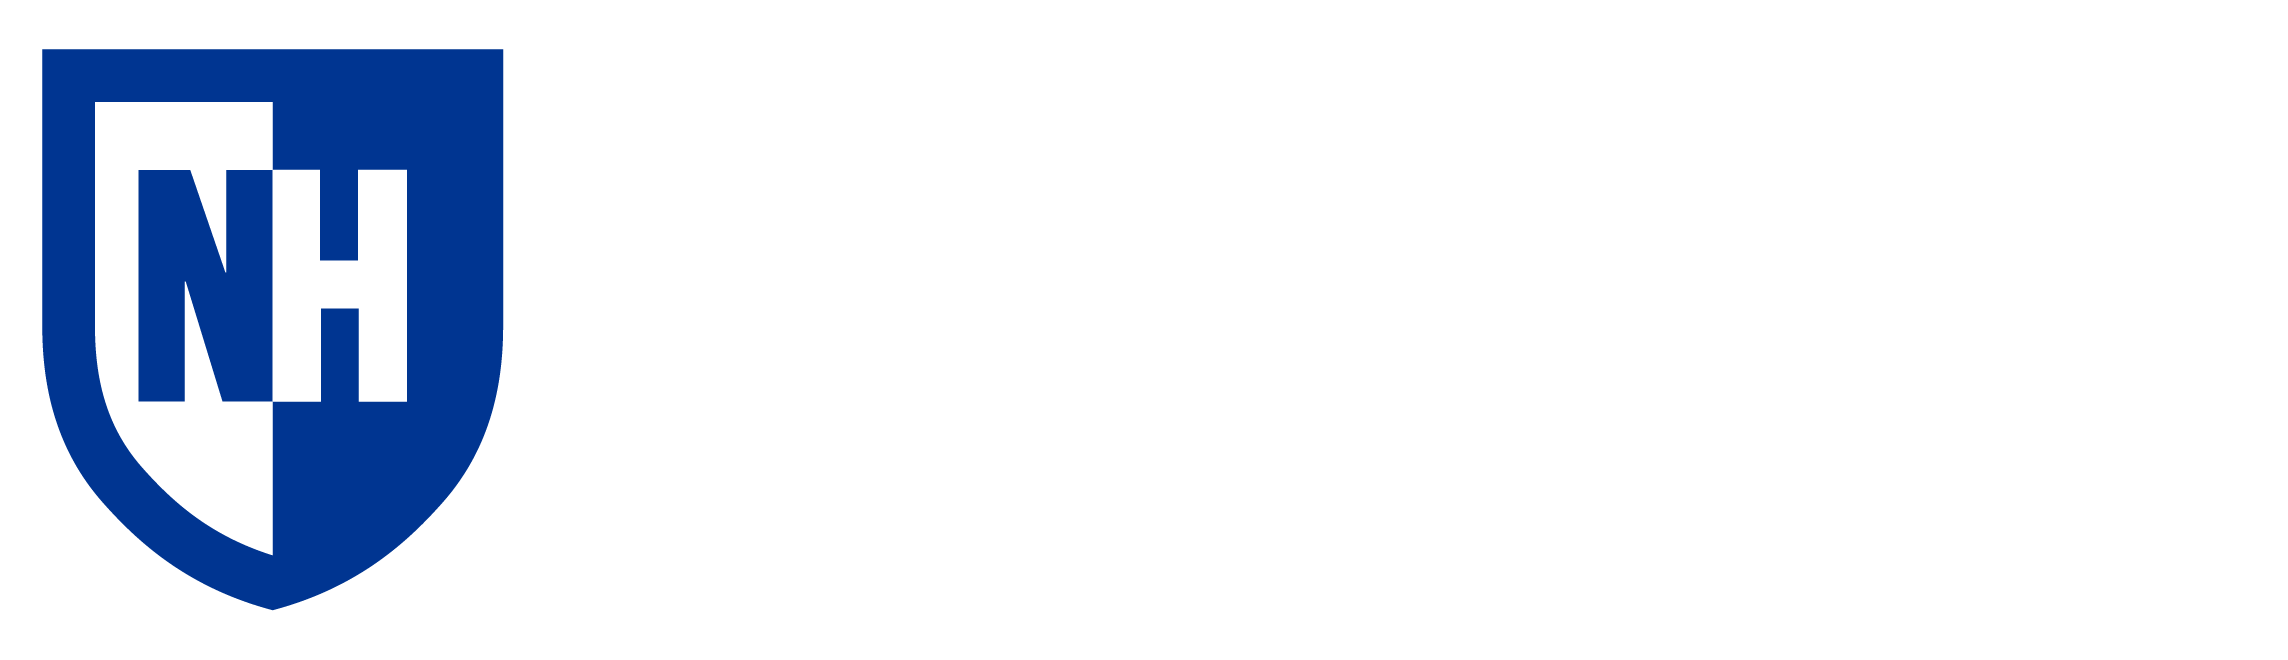 University of New Hampshire in white text next to blue and white UNH shield logo